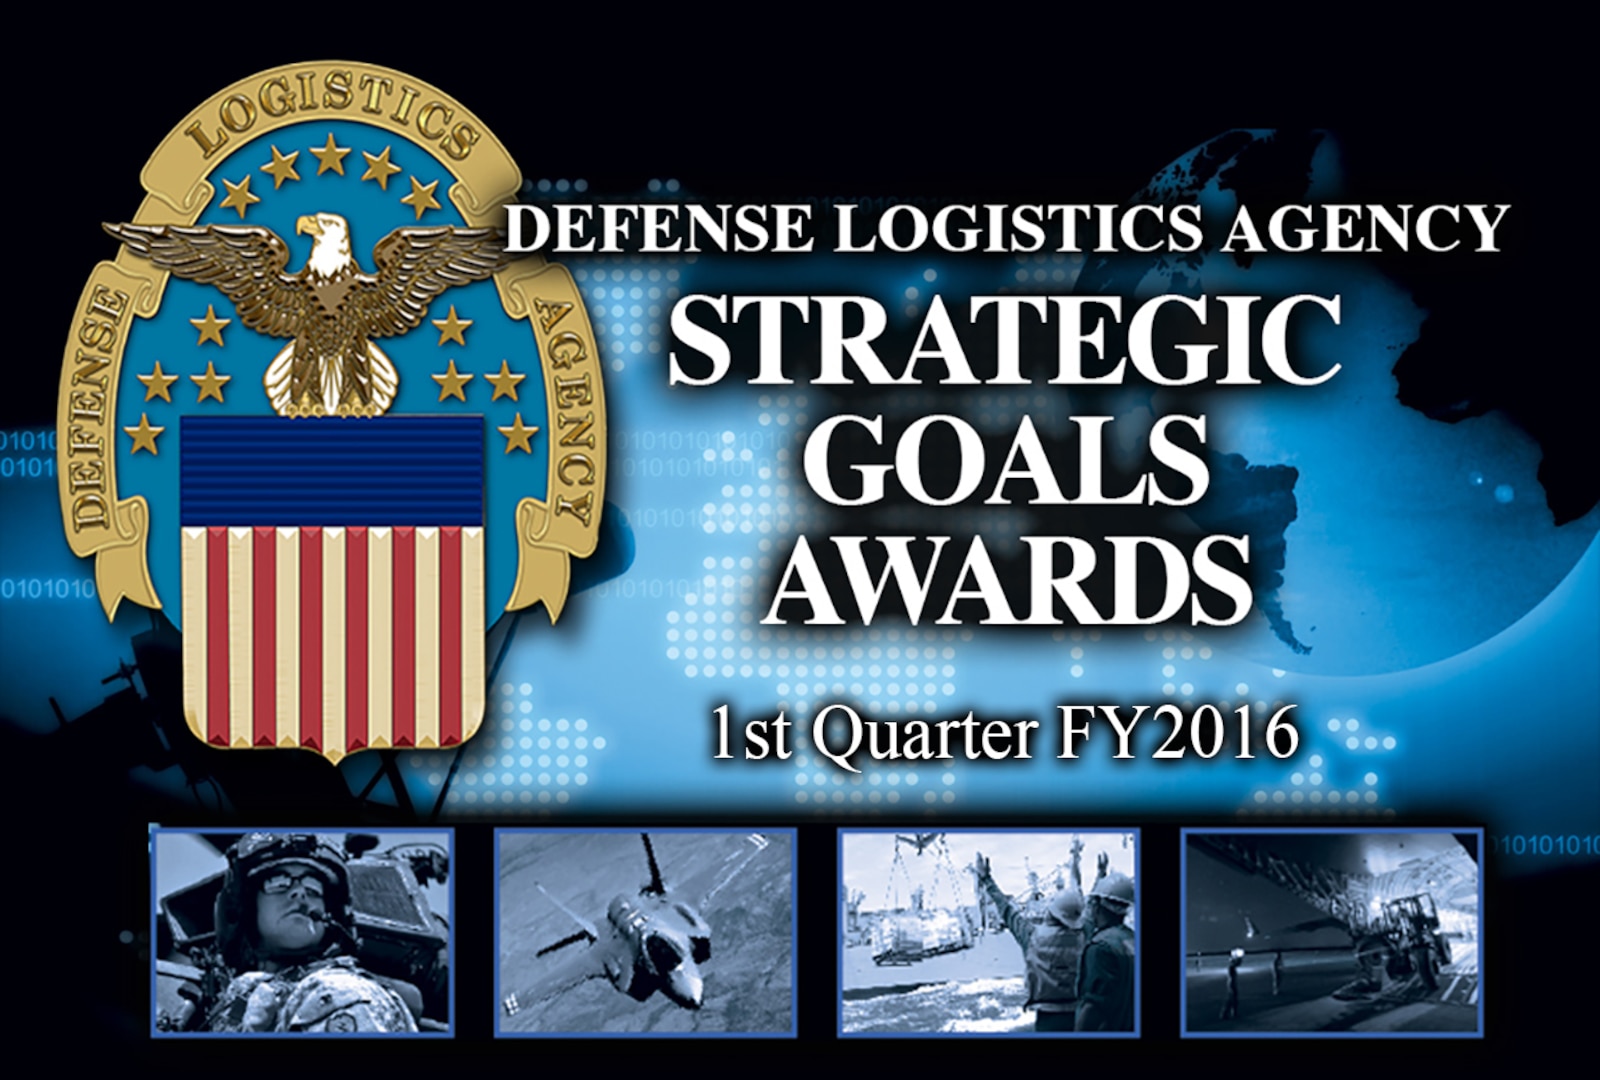 DLA employees and teams were recently honored for their achievements in helping the agency achieve its strategic goals.